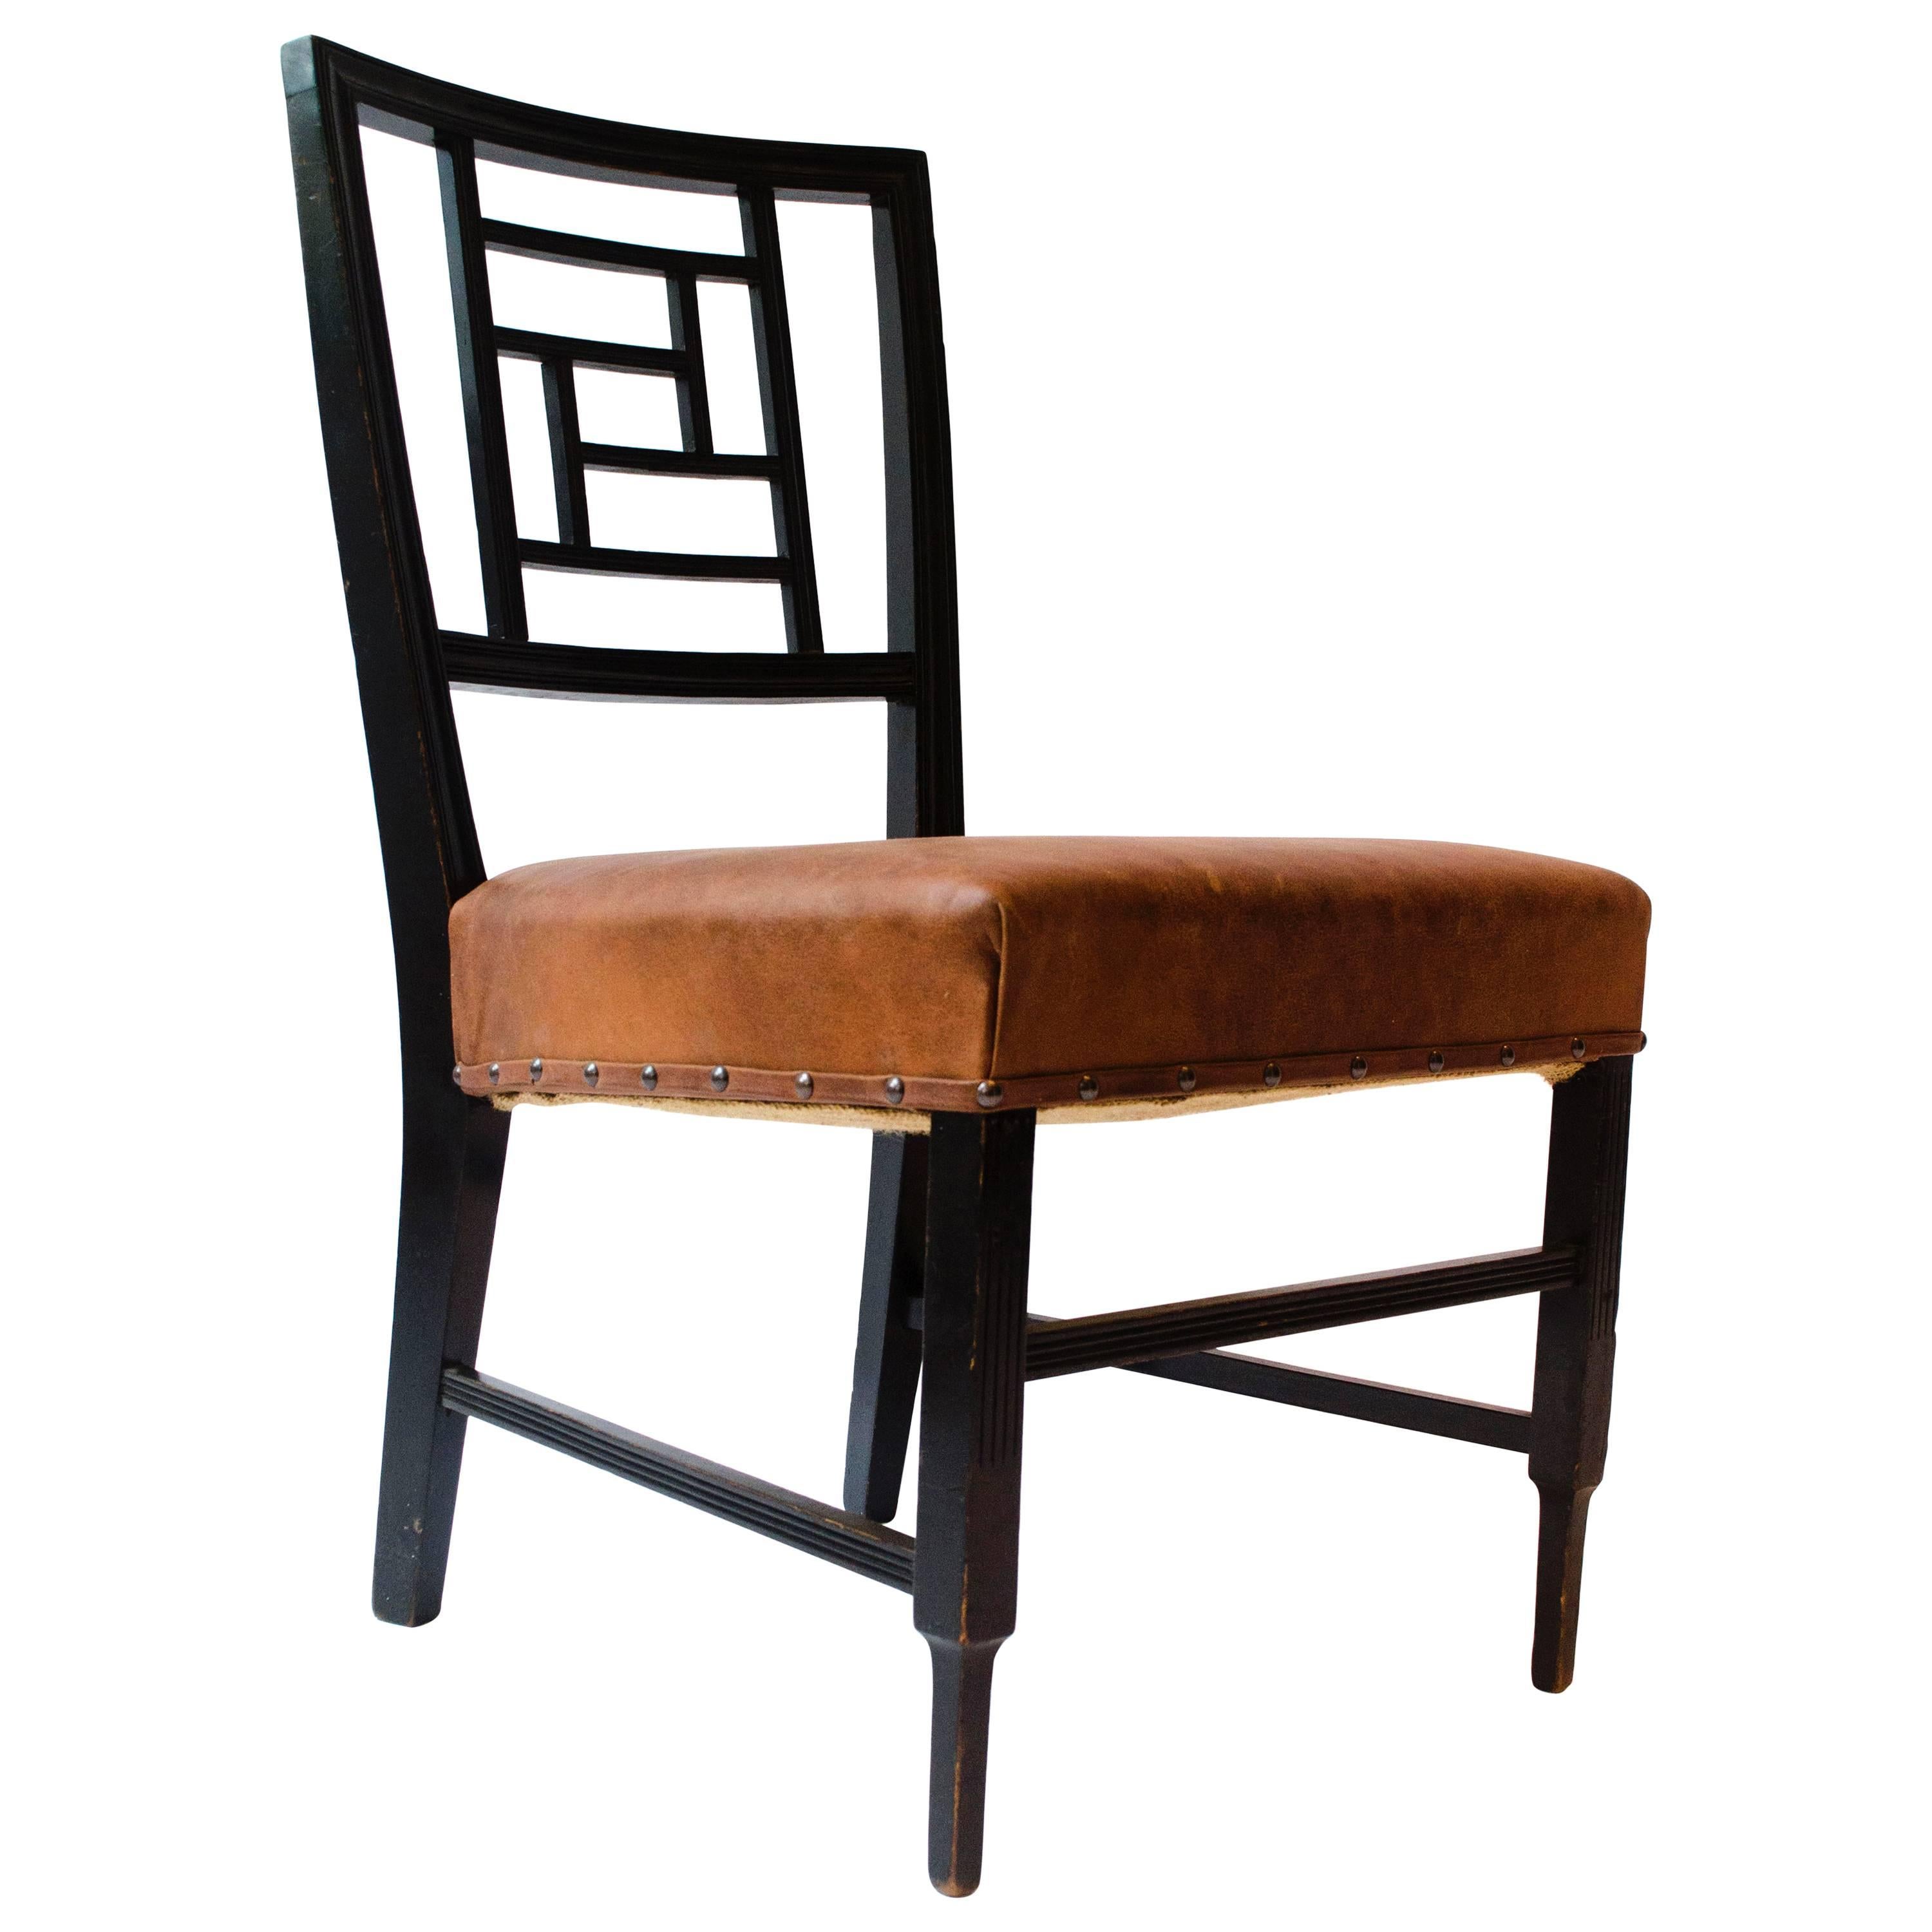 E W Godwin. An Anglo-Japanese Ebonized Side Chair Probably Made by William Watt